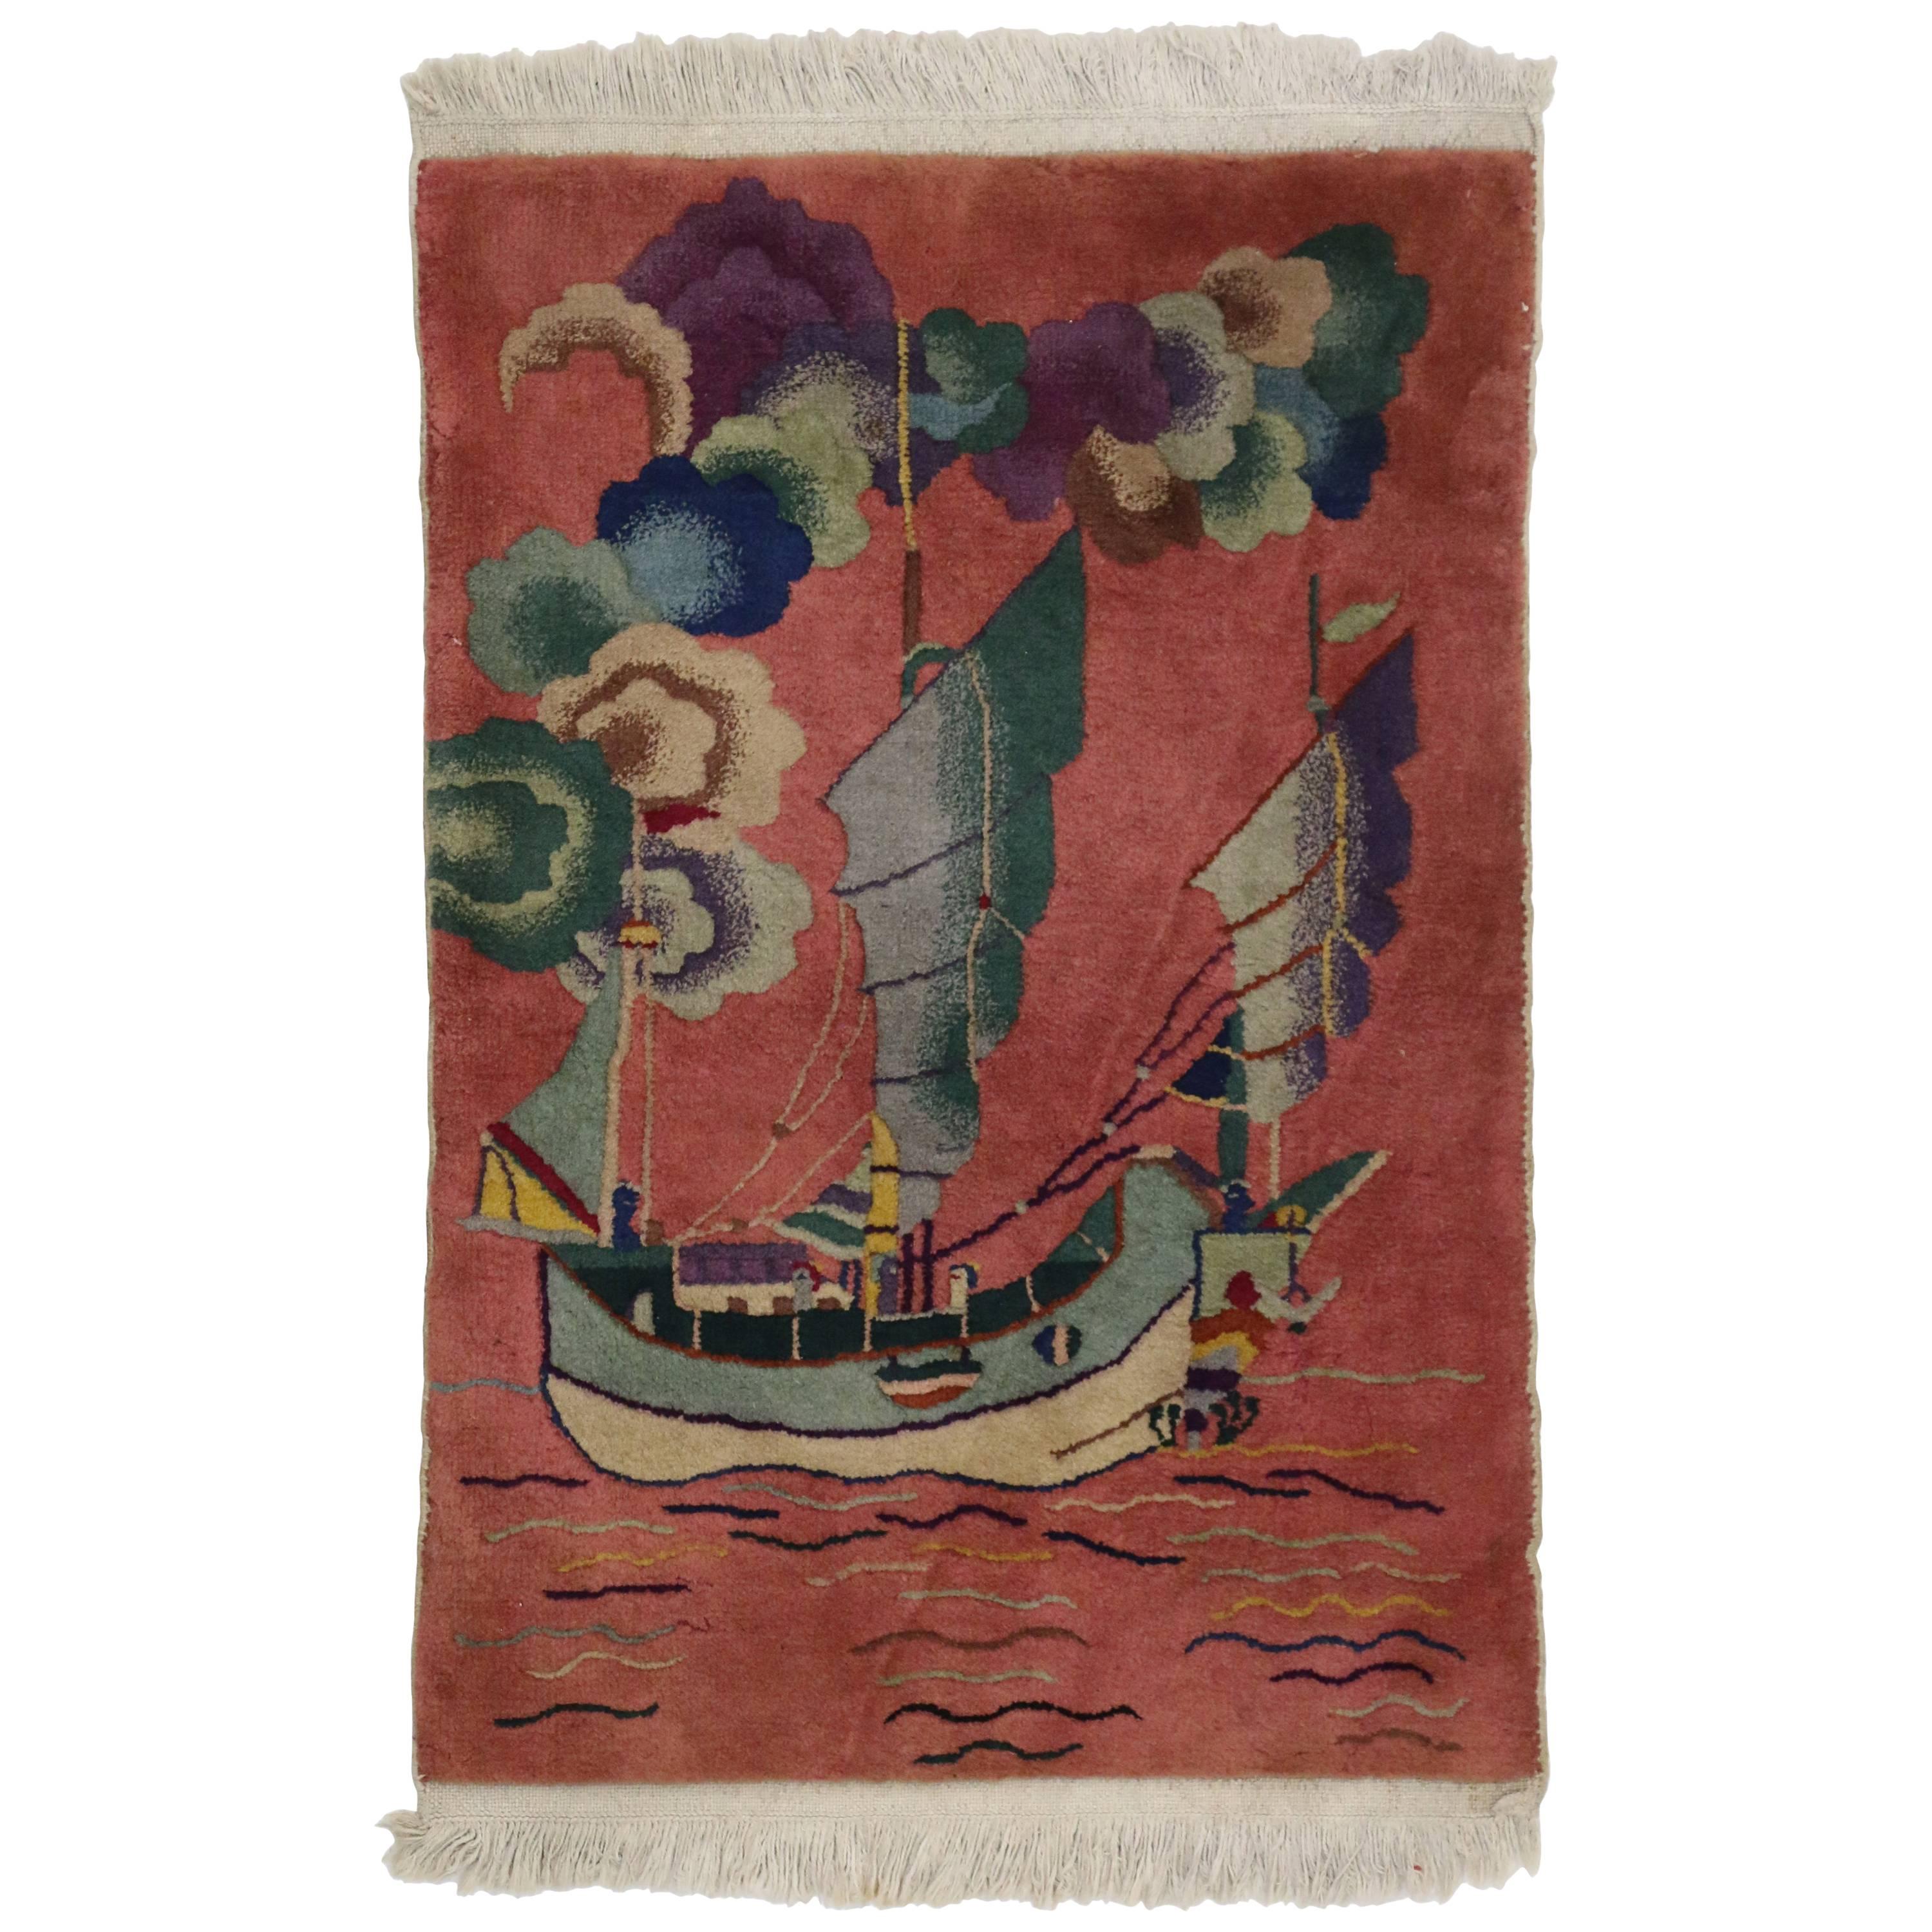 Antique Chinese Art Deco Rug with Sailing Ship, Maximalism Asian Modern Tapestry